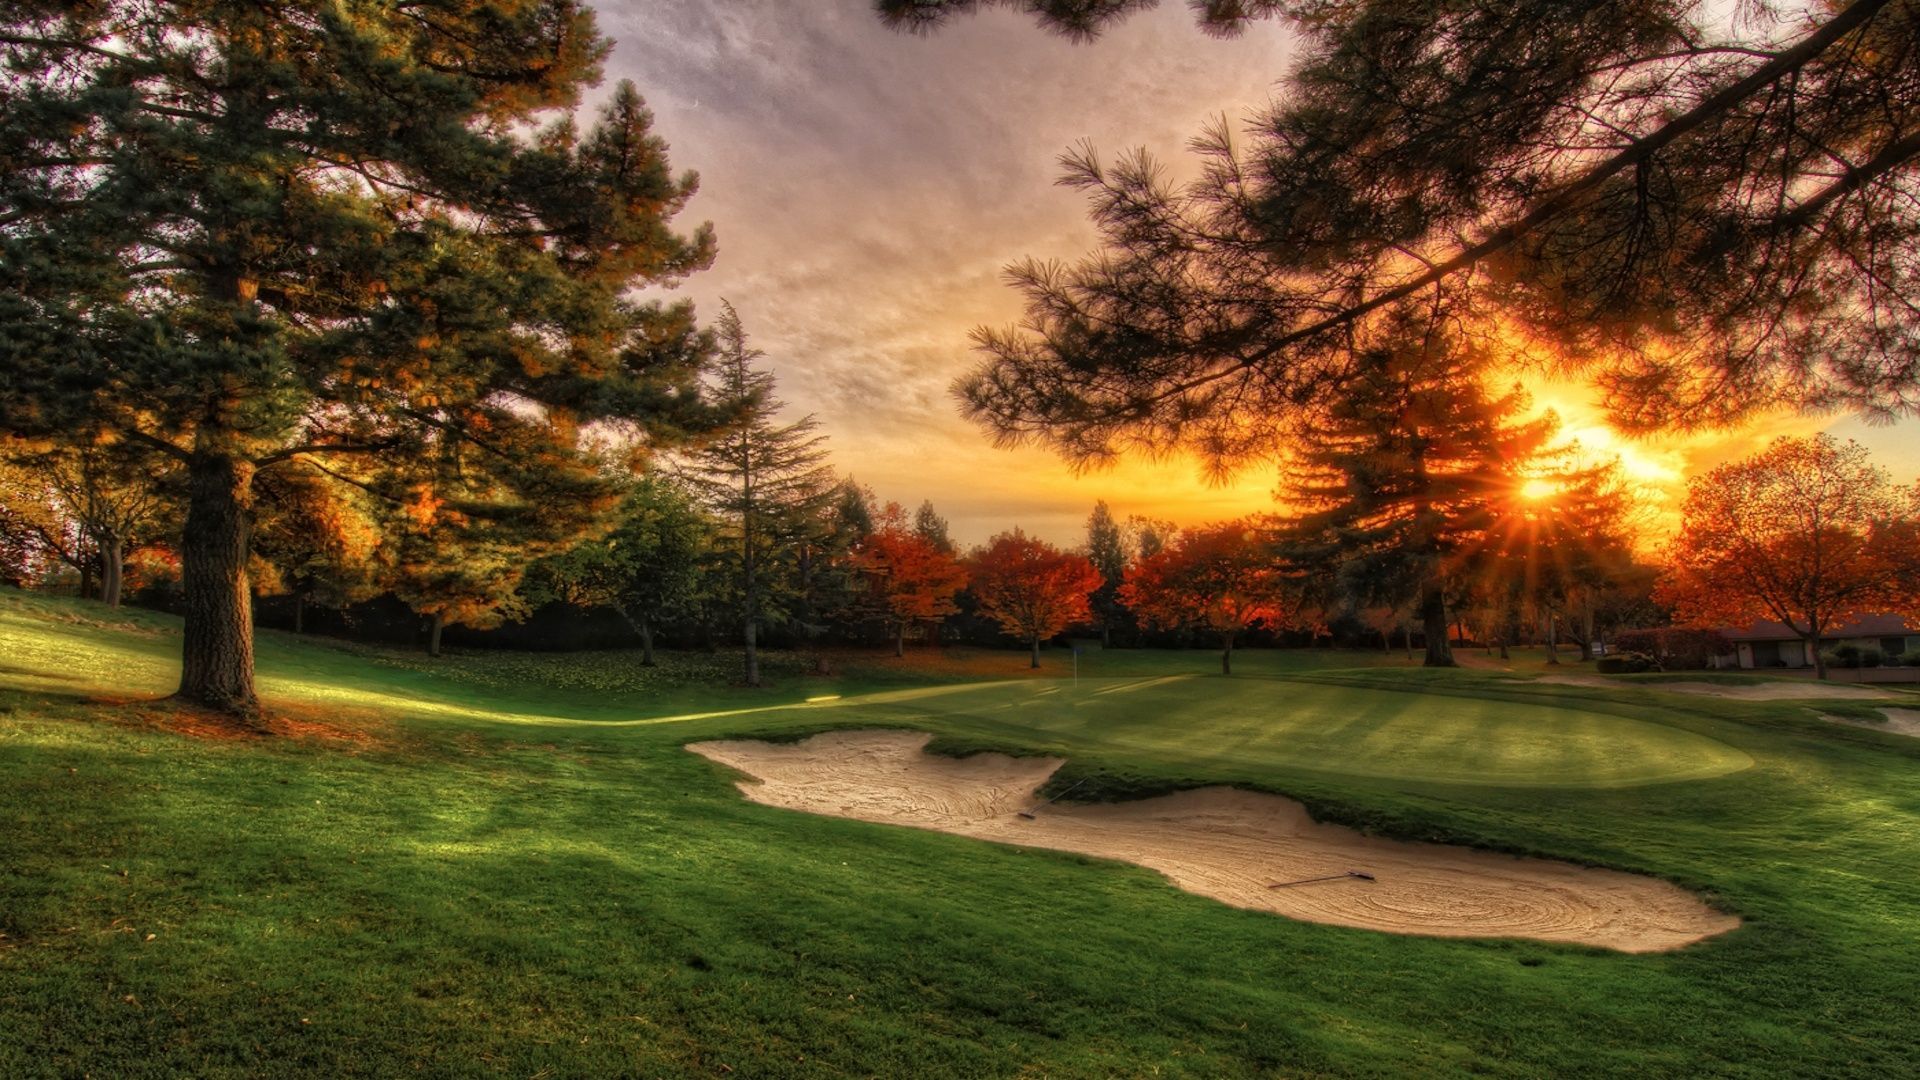 Golf Course HD Wallpaper Golf Course Pictures Cool Backgrounds